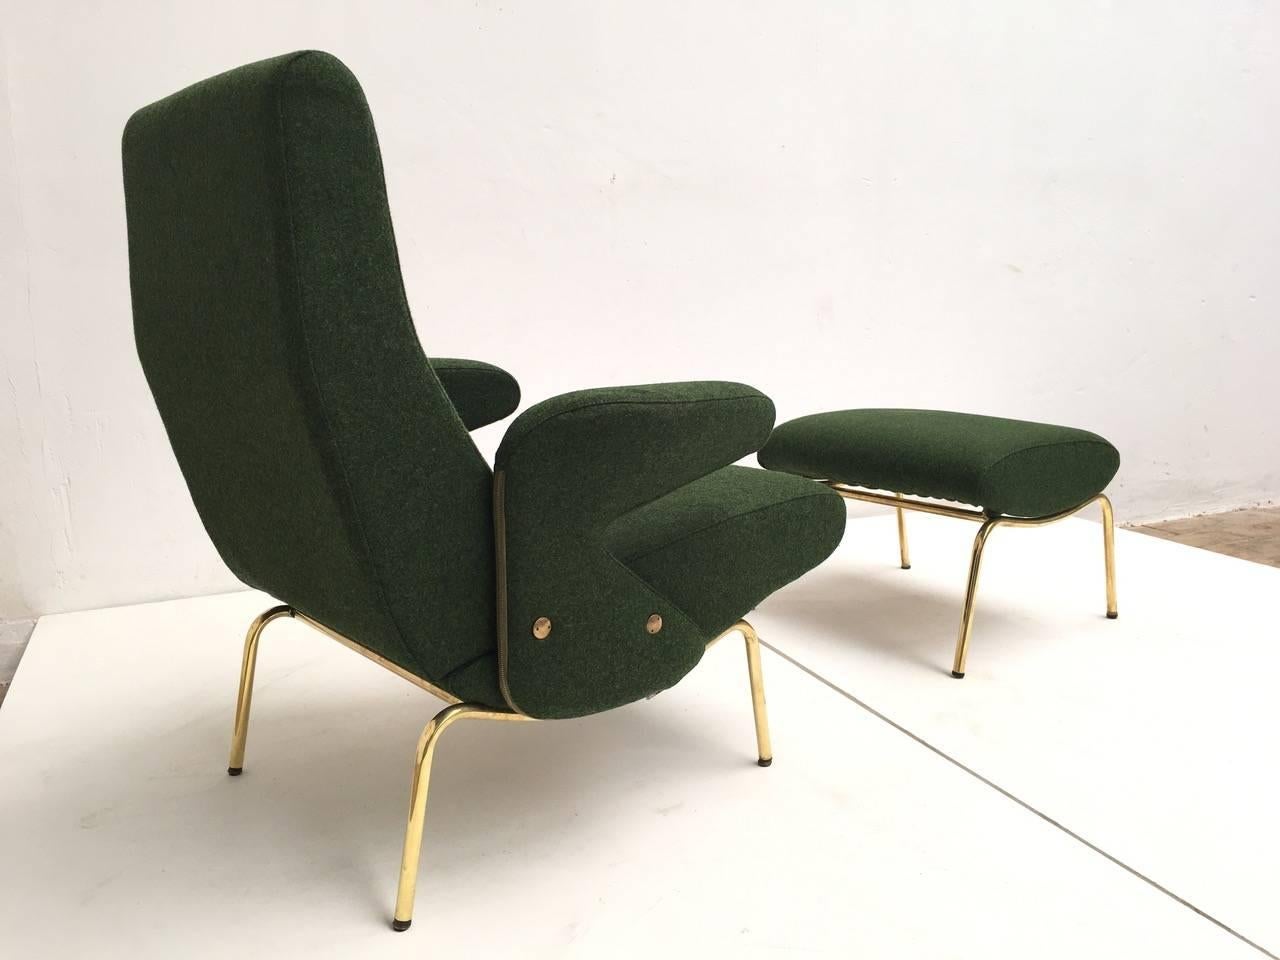 Italian 'Delfino' Lounge Chair & Ottoman by Carboni for Arflex, 1954, Very Early Examples